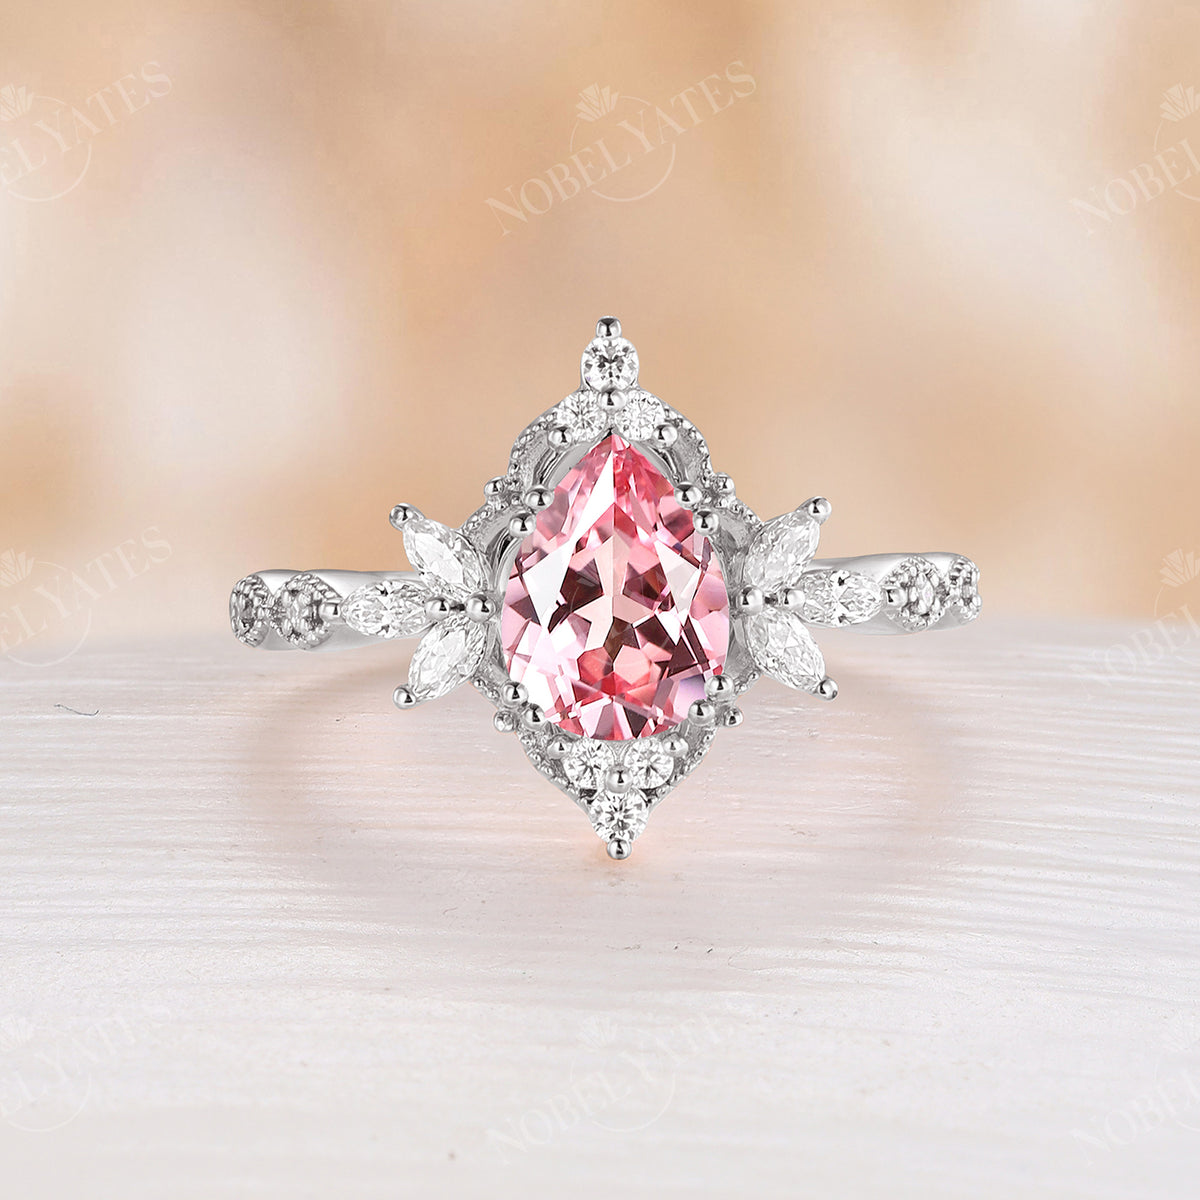 Lab Grown Padparadscha Pear Cut Engagement Ring Vintage Rose Gold